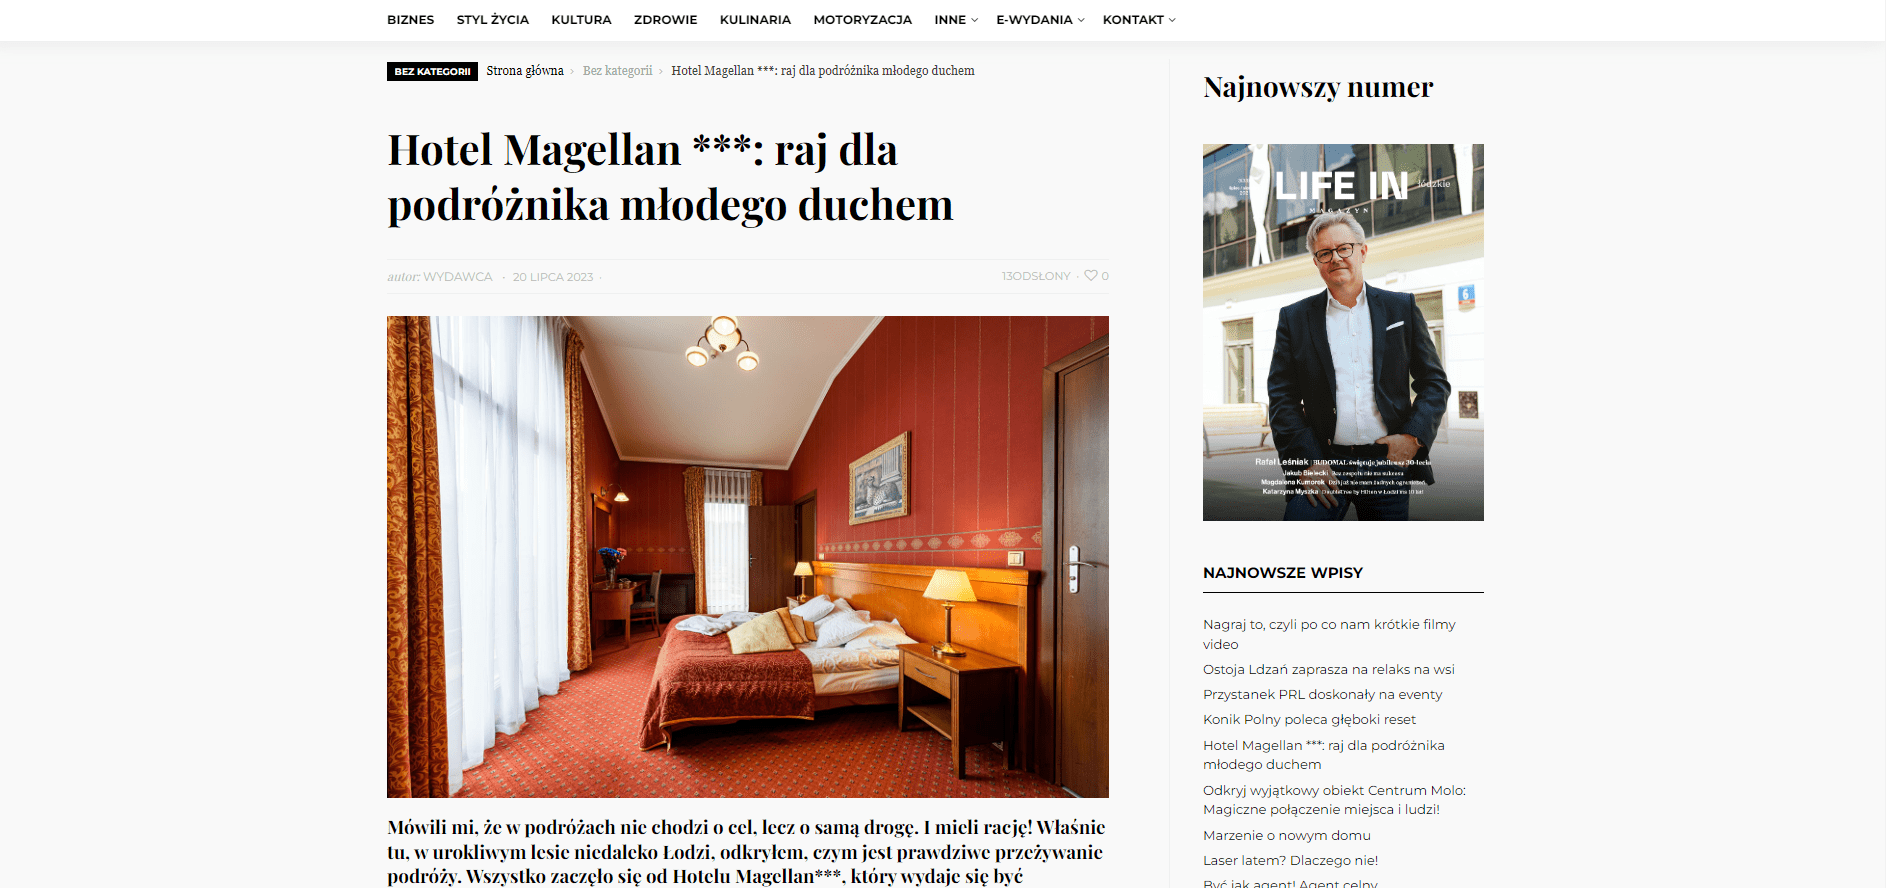 Life In Lodz discovers Magellan Hotel in Bronislawow